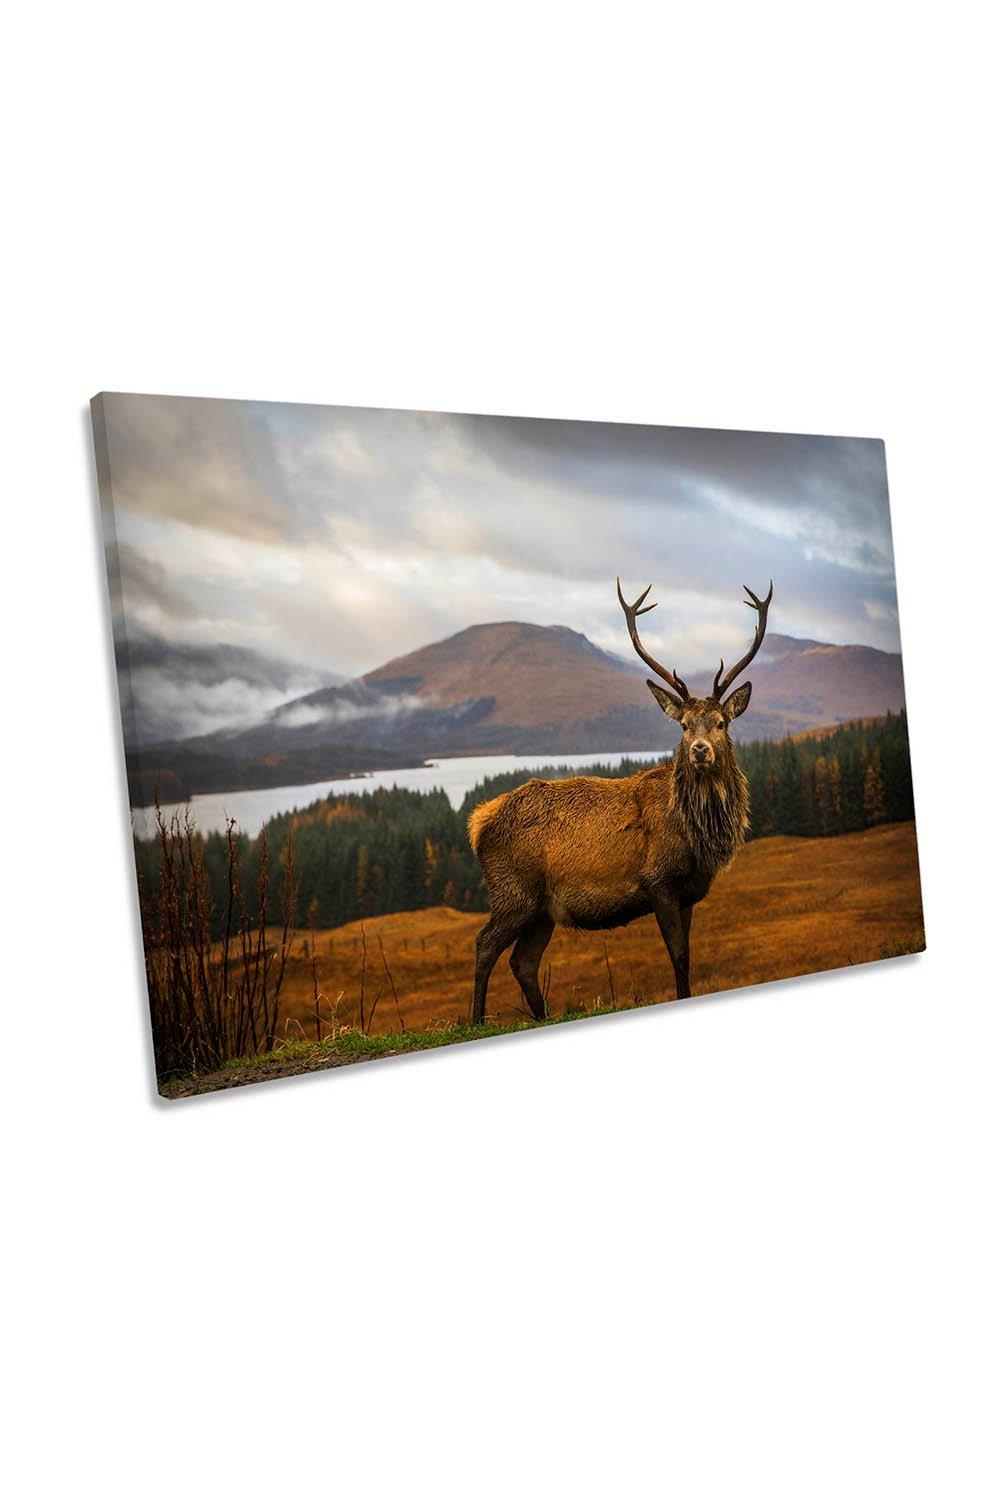 Scottish Highlands Stag Deer Antlers Canvas Wall Art Picture Print